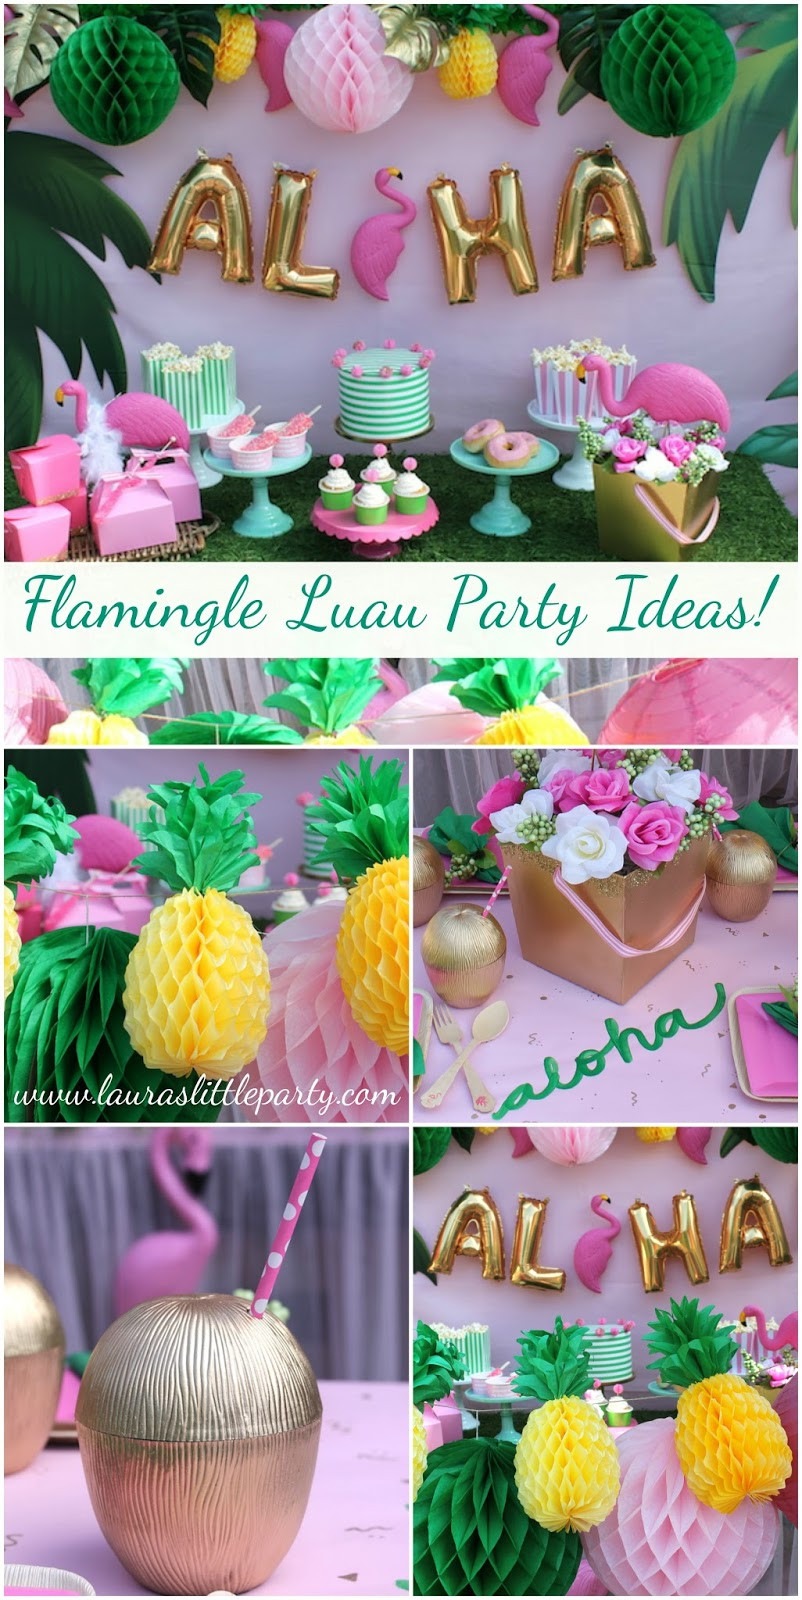 Party Theme Ideas For Summer
 Let s Flamingle Luau Summer Party Ideas LAURA S little